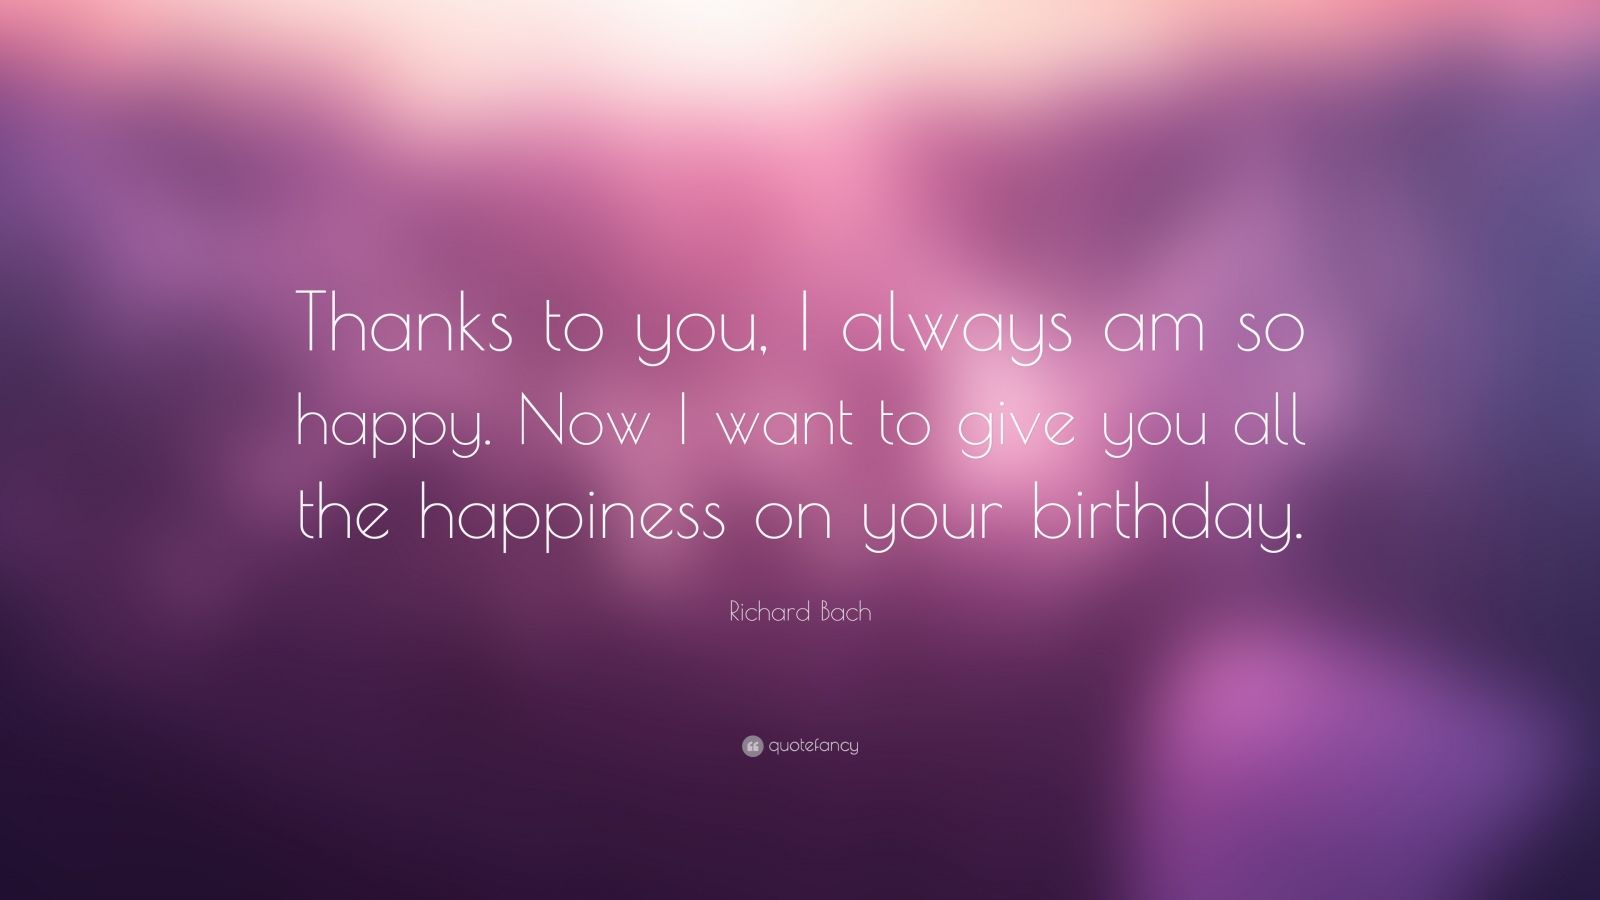 Richard Bach Quote Thanks To You I Always Am So Happy Now I Want To Give You All The Happiness On Your Birthday